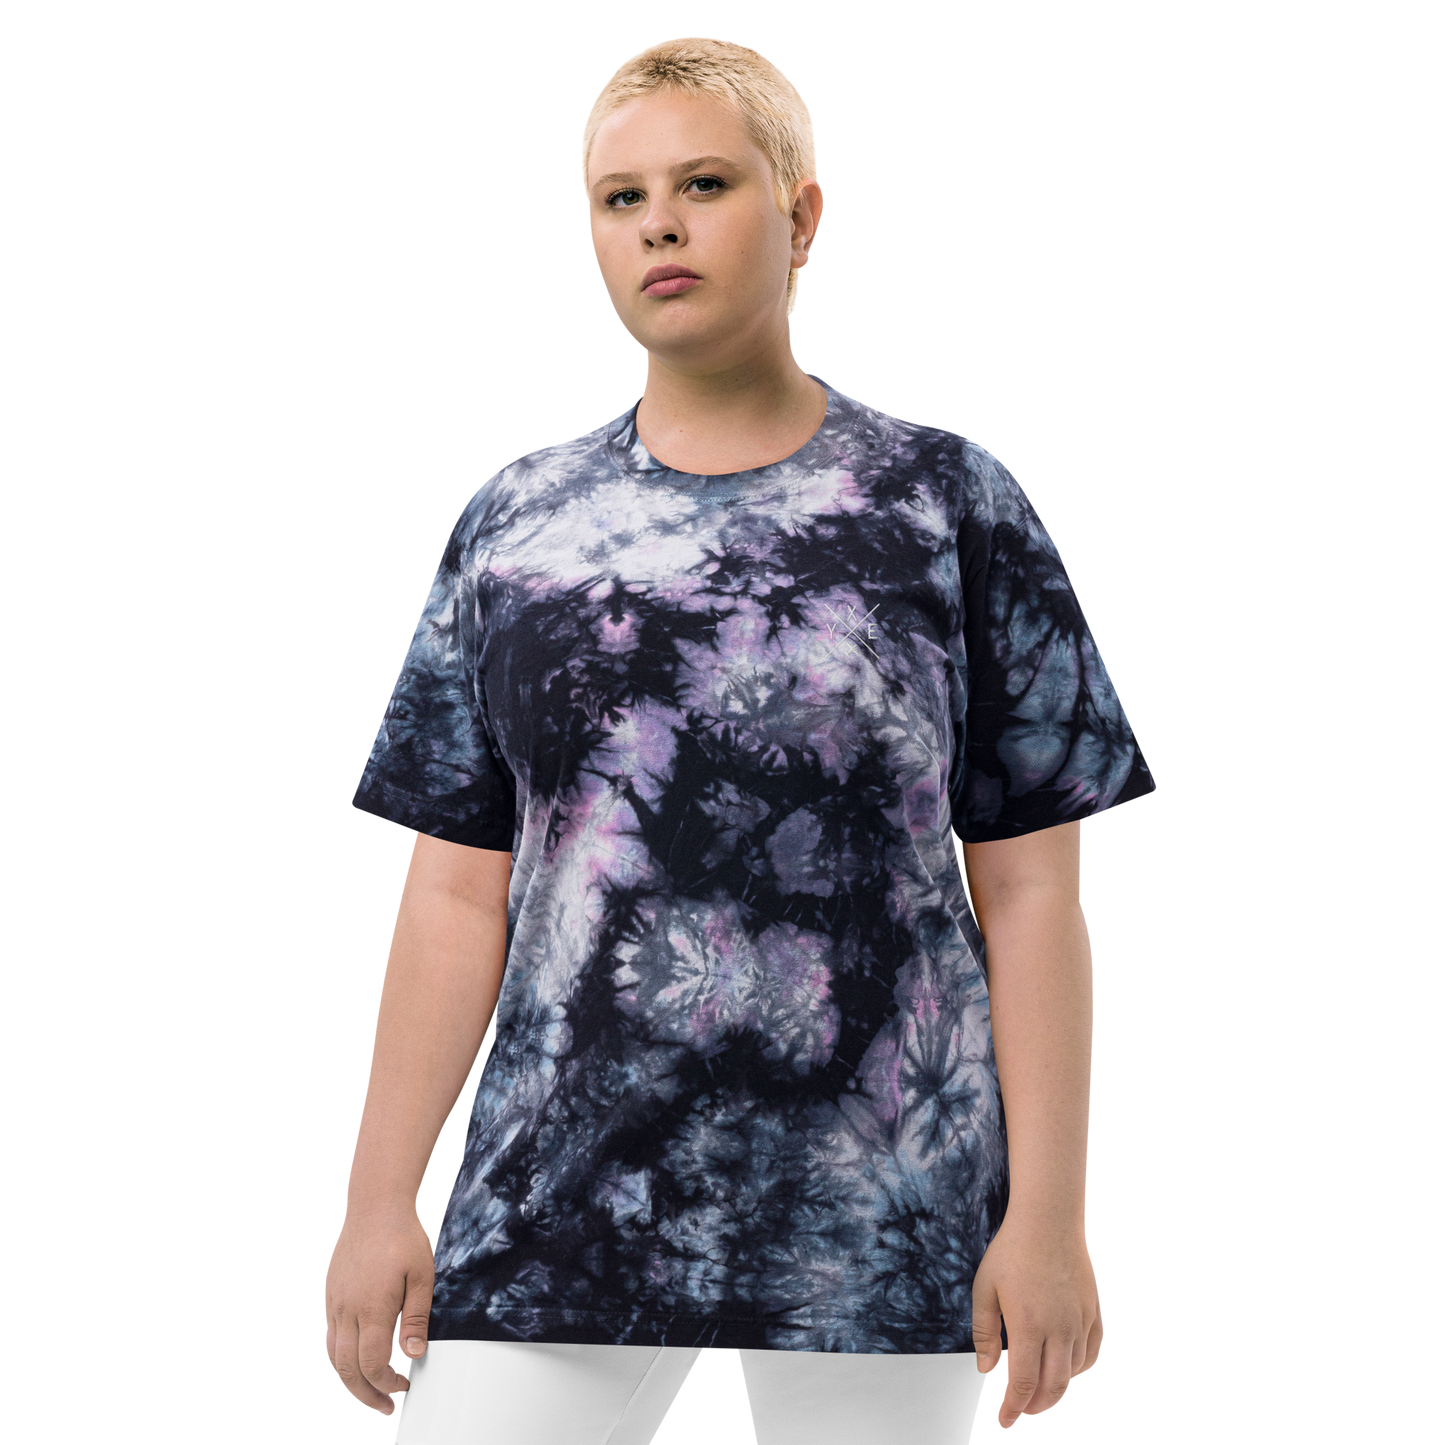 YHM Designs - YXE Saskatoon Oversized Tie-Dye T-Shirt - Crossed-X Design with Airport Code and Vintage Propliner - White Embroidery - Image 05